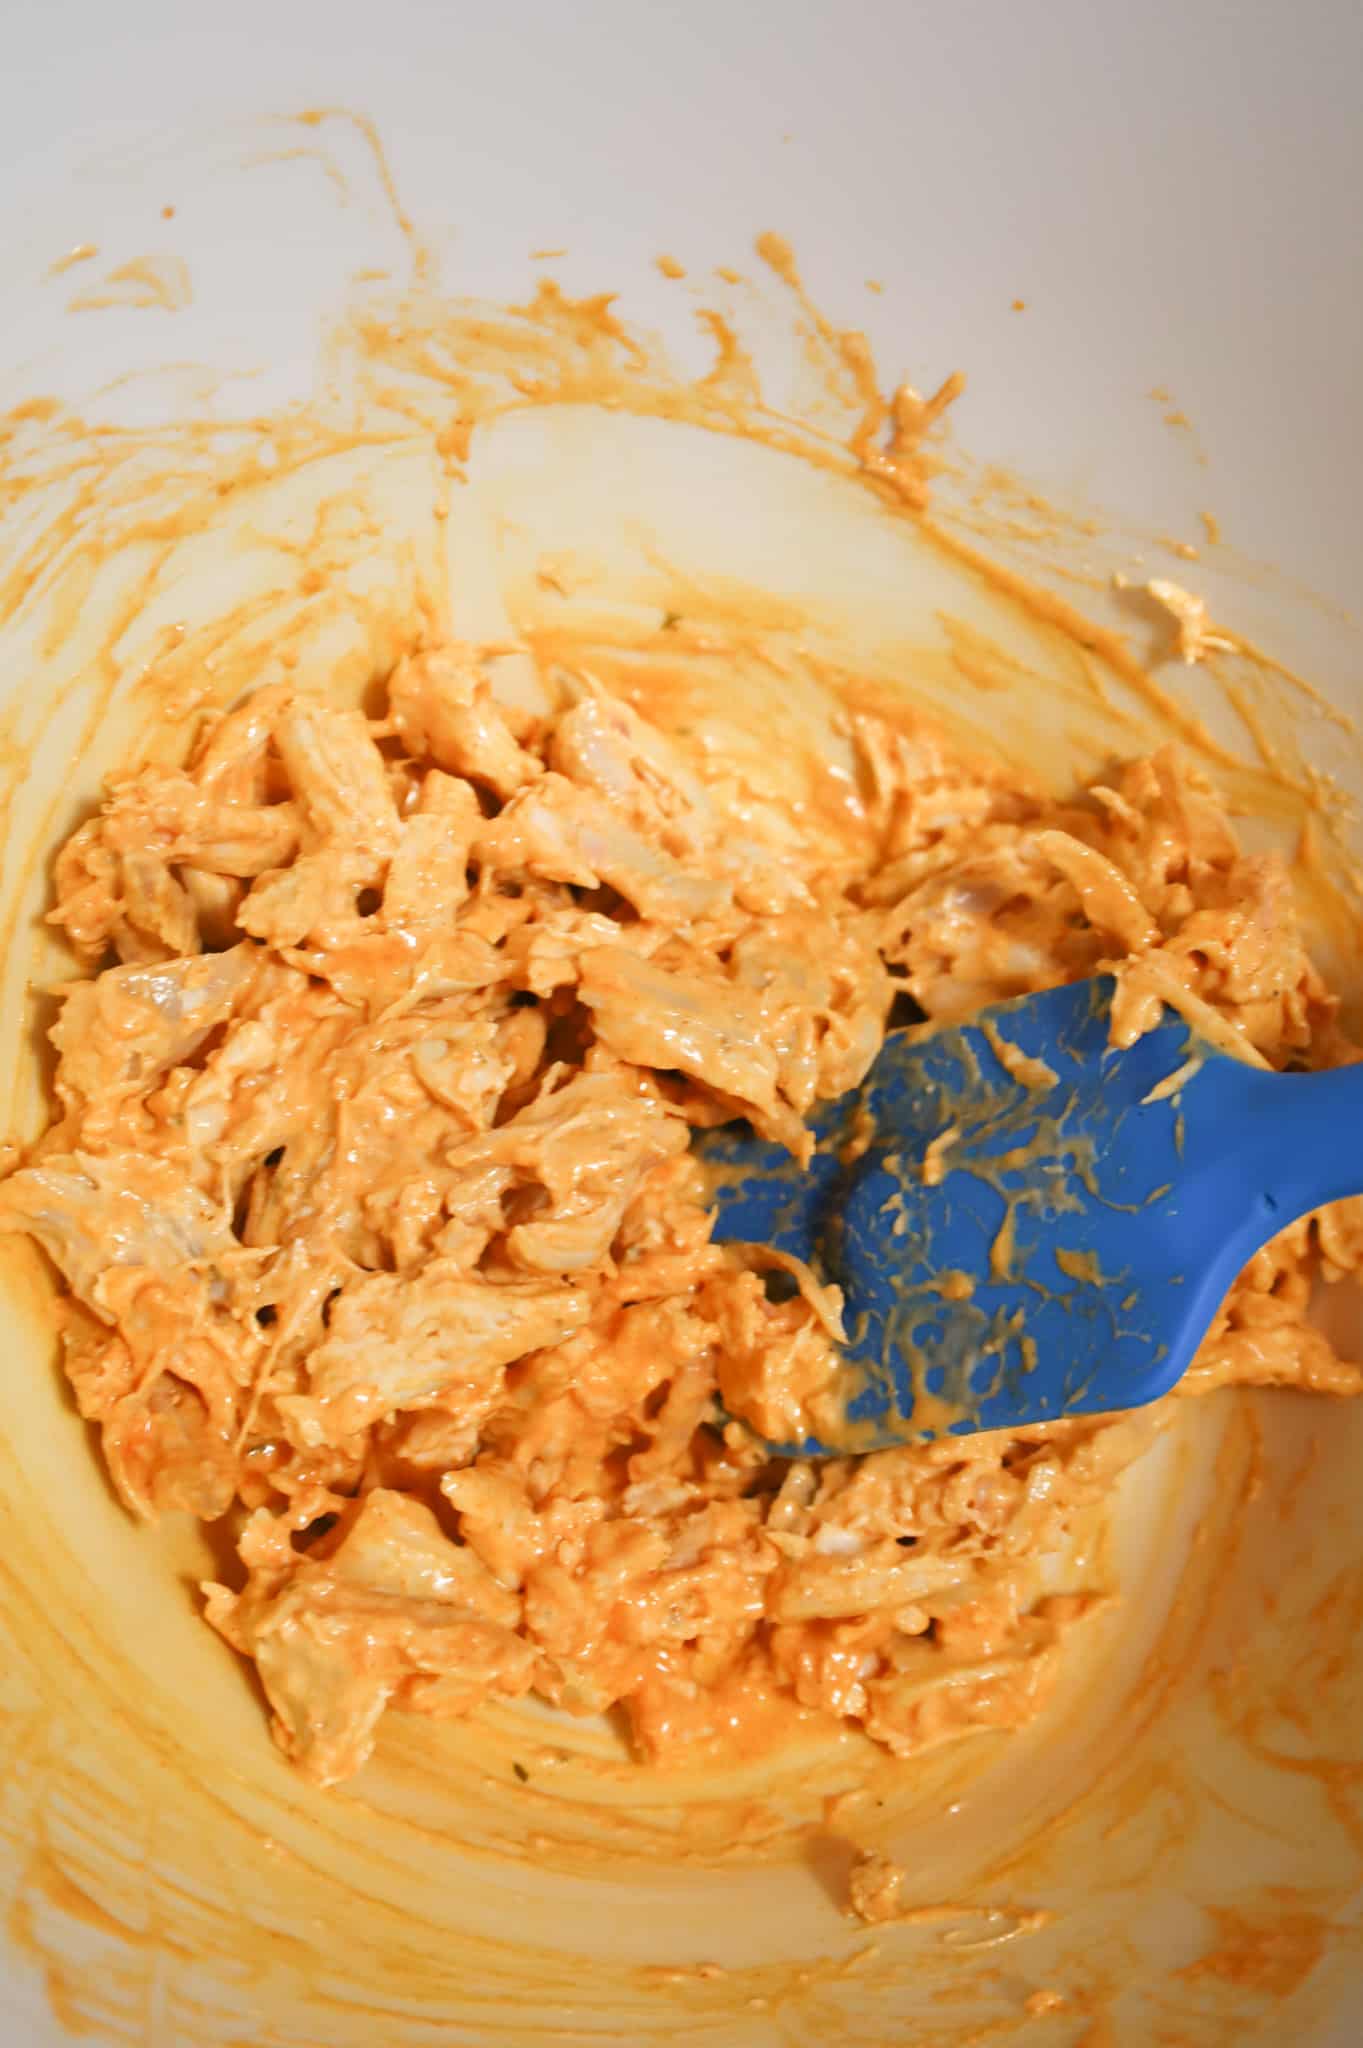 shredded chicken coated with Buffalo sauce and ranch dressing